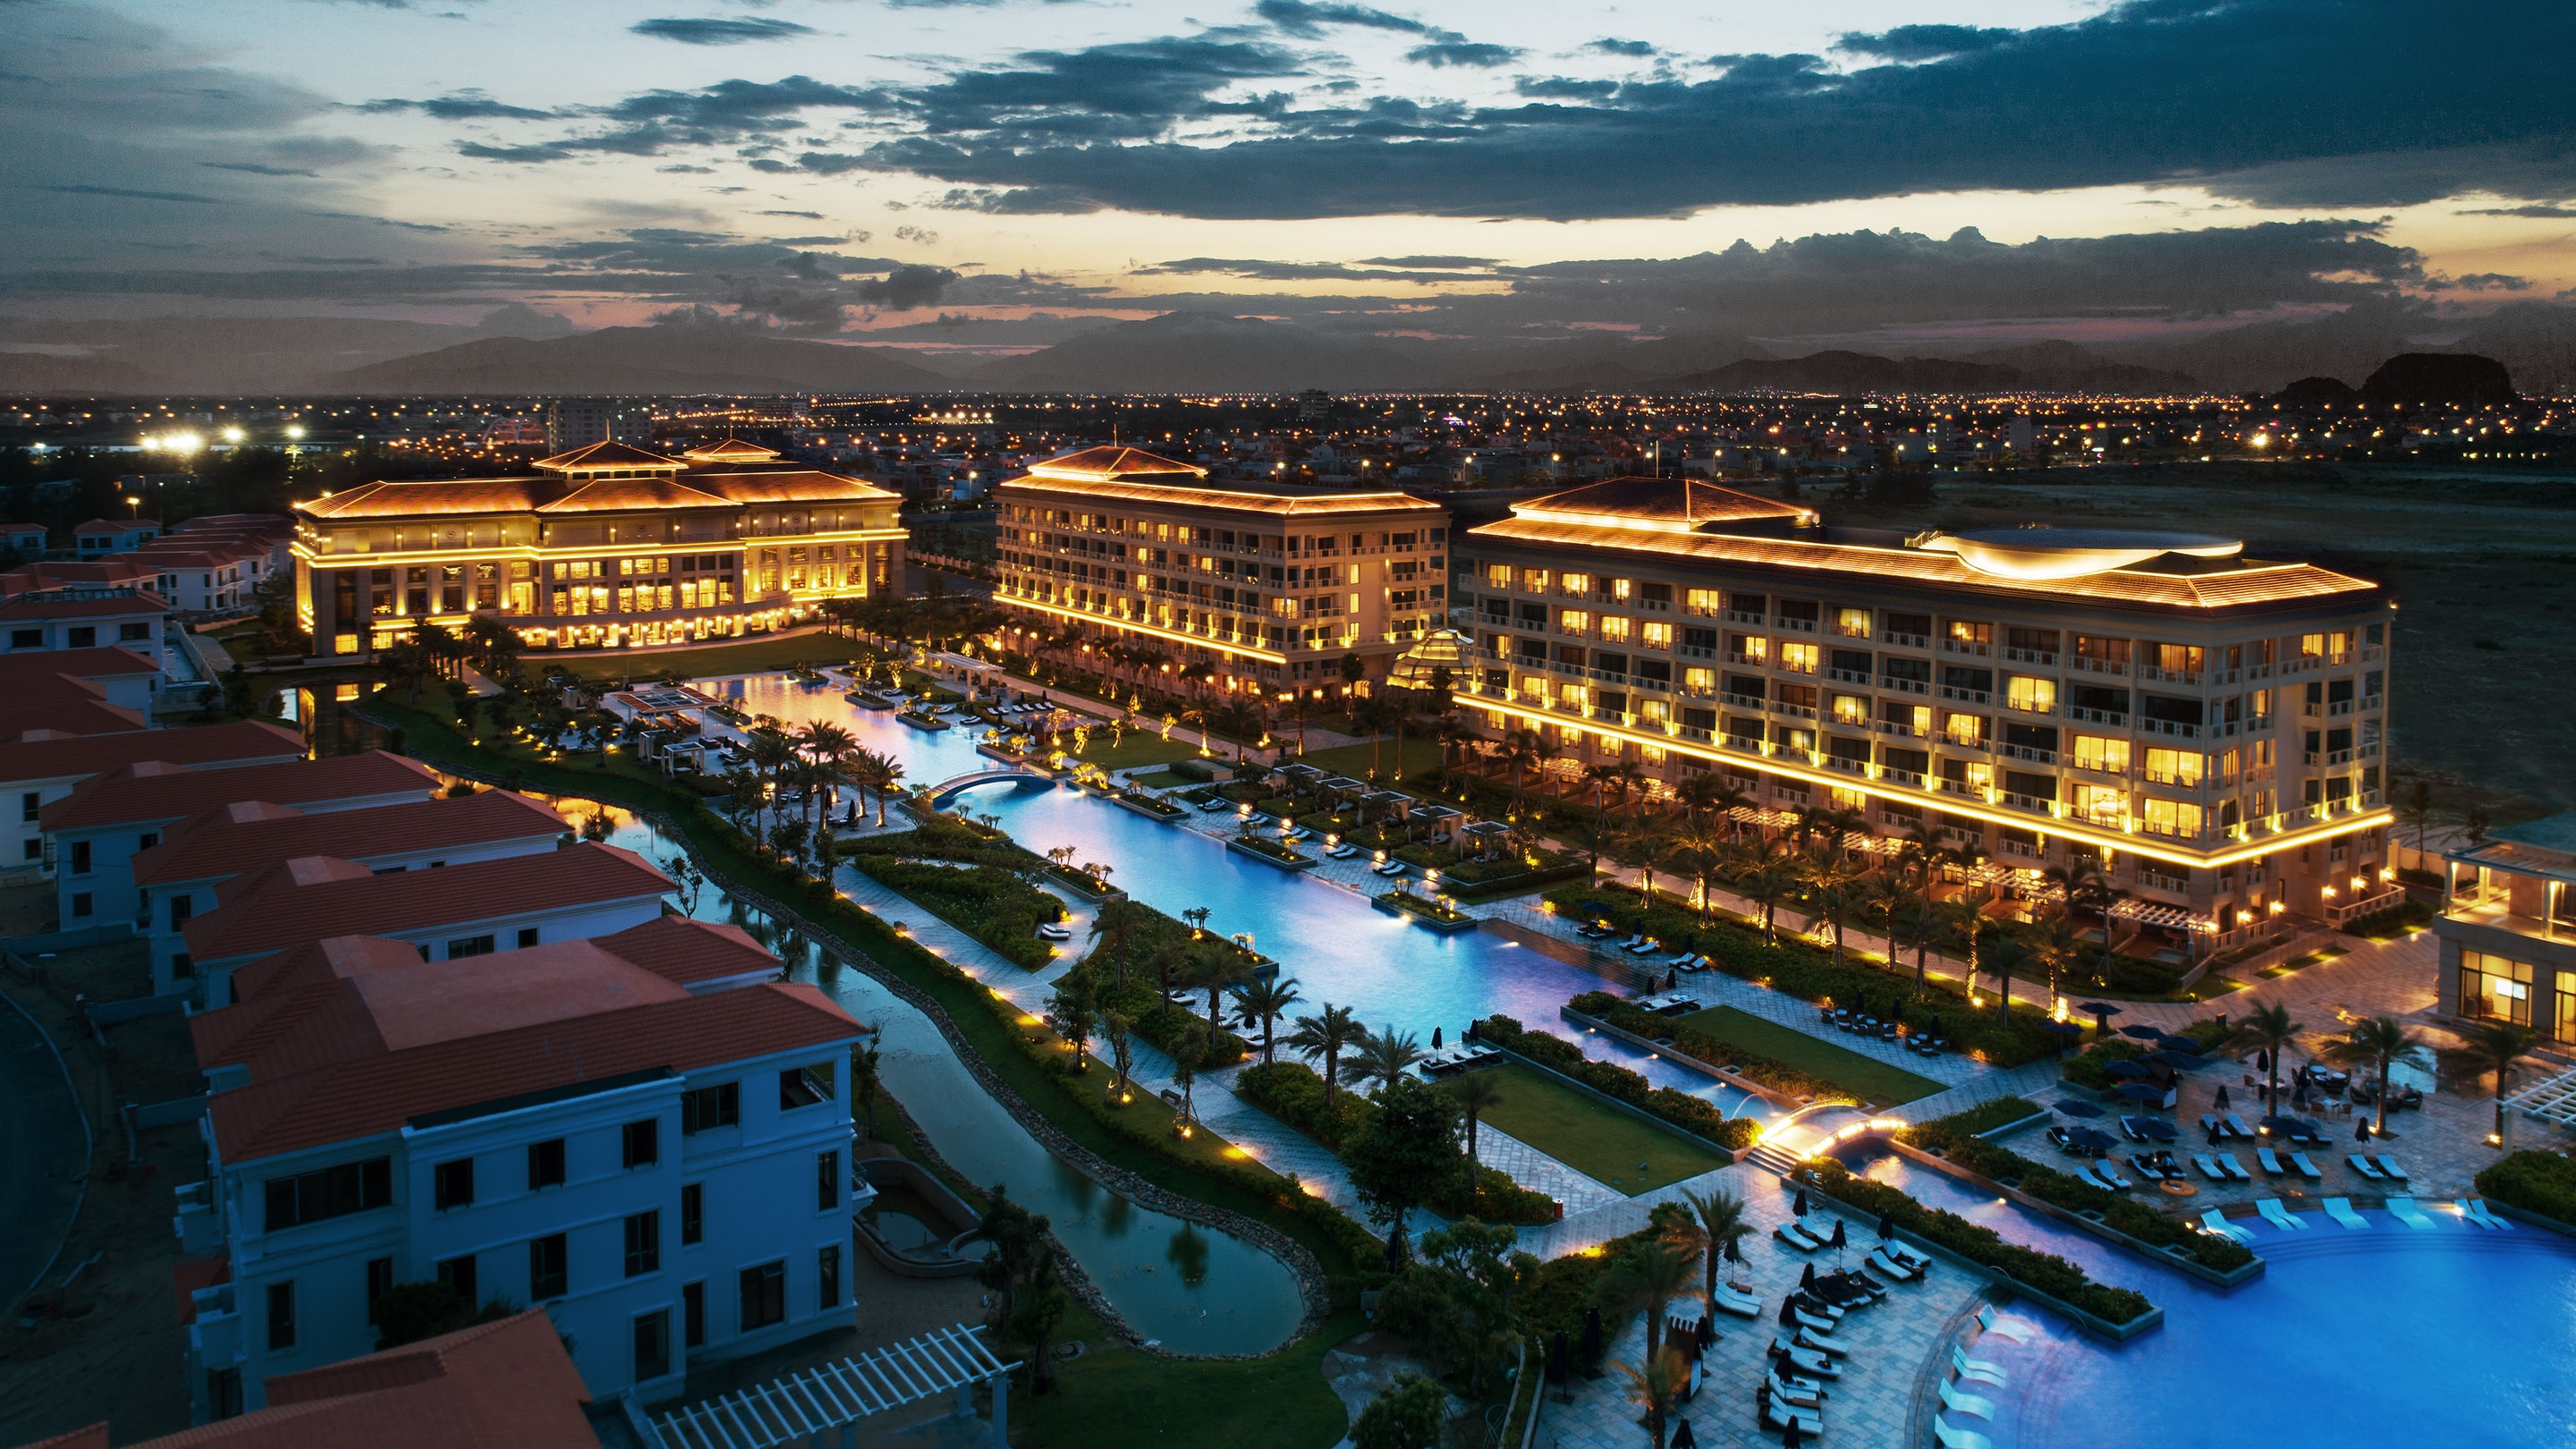 Evening view of the resort exterior and surrounding area